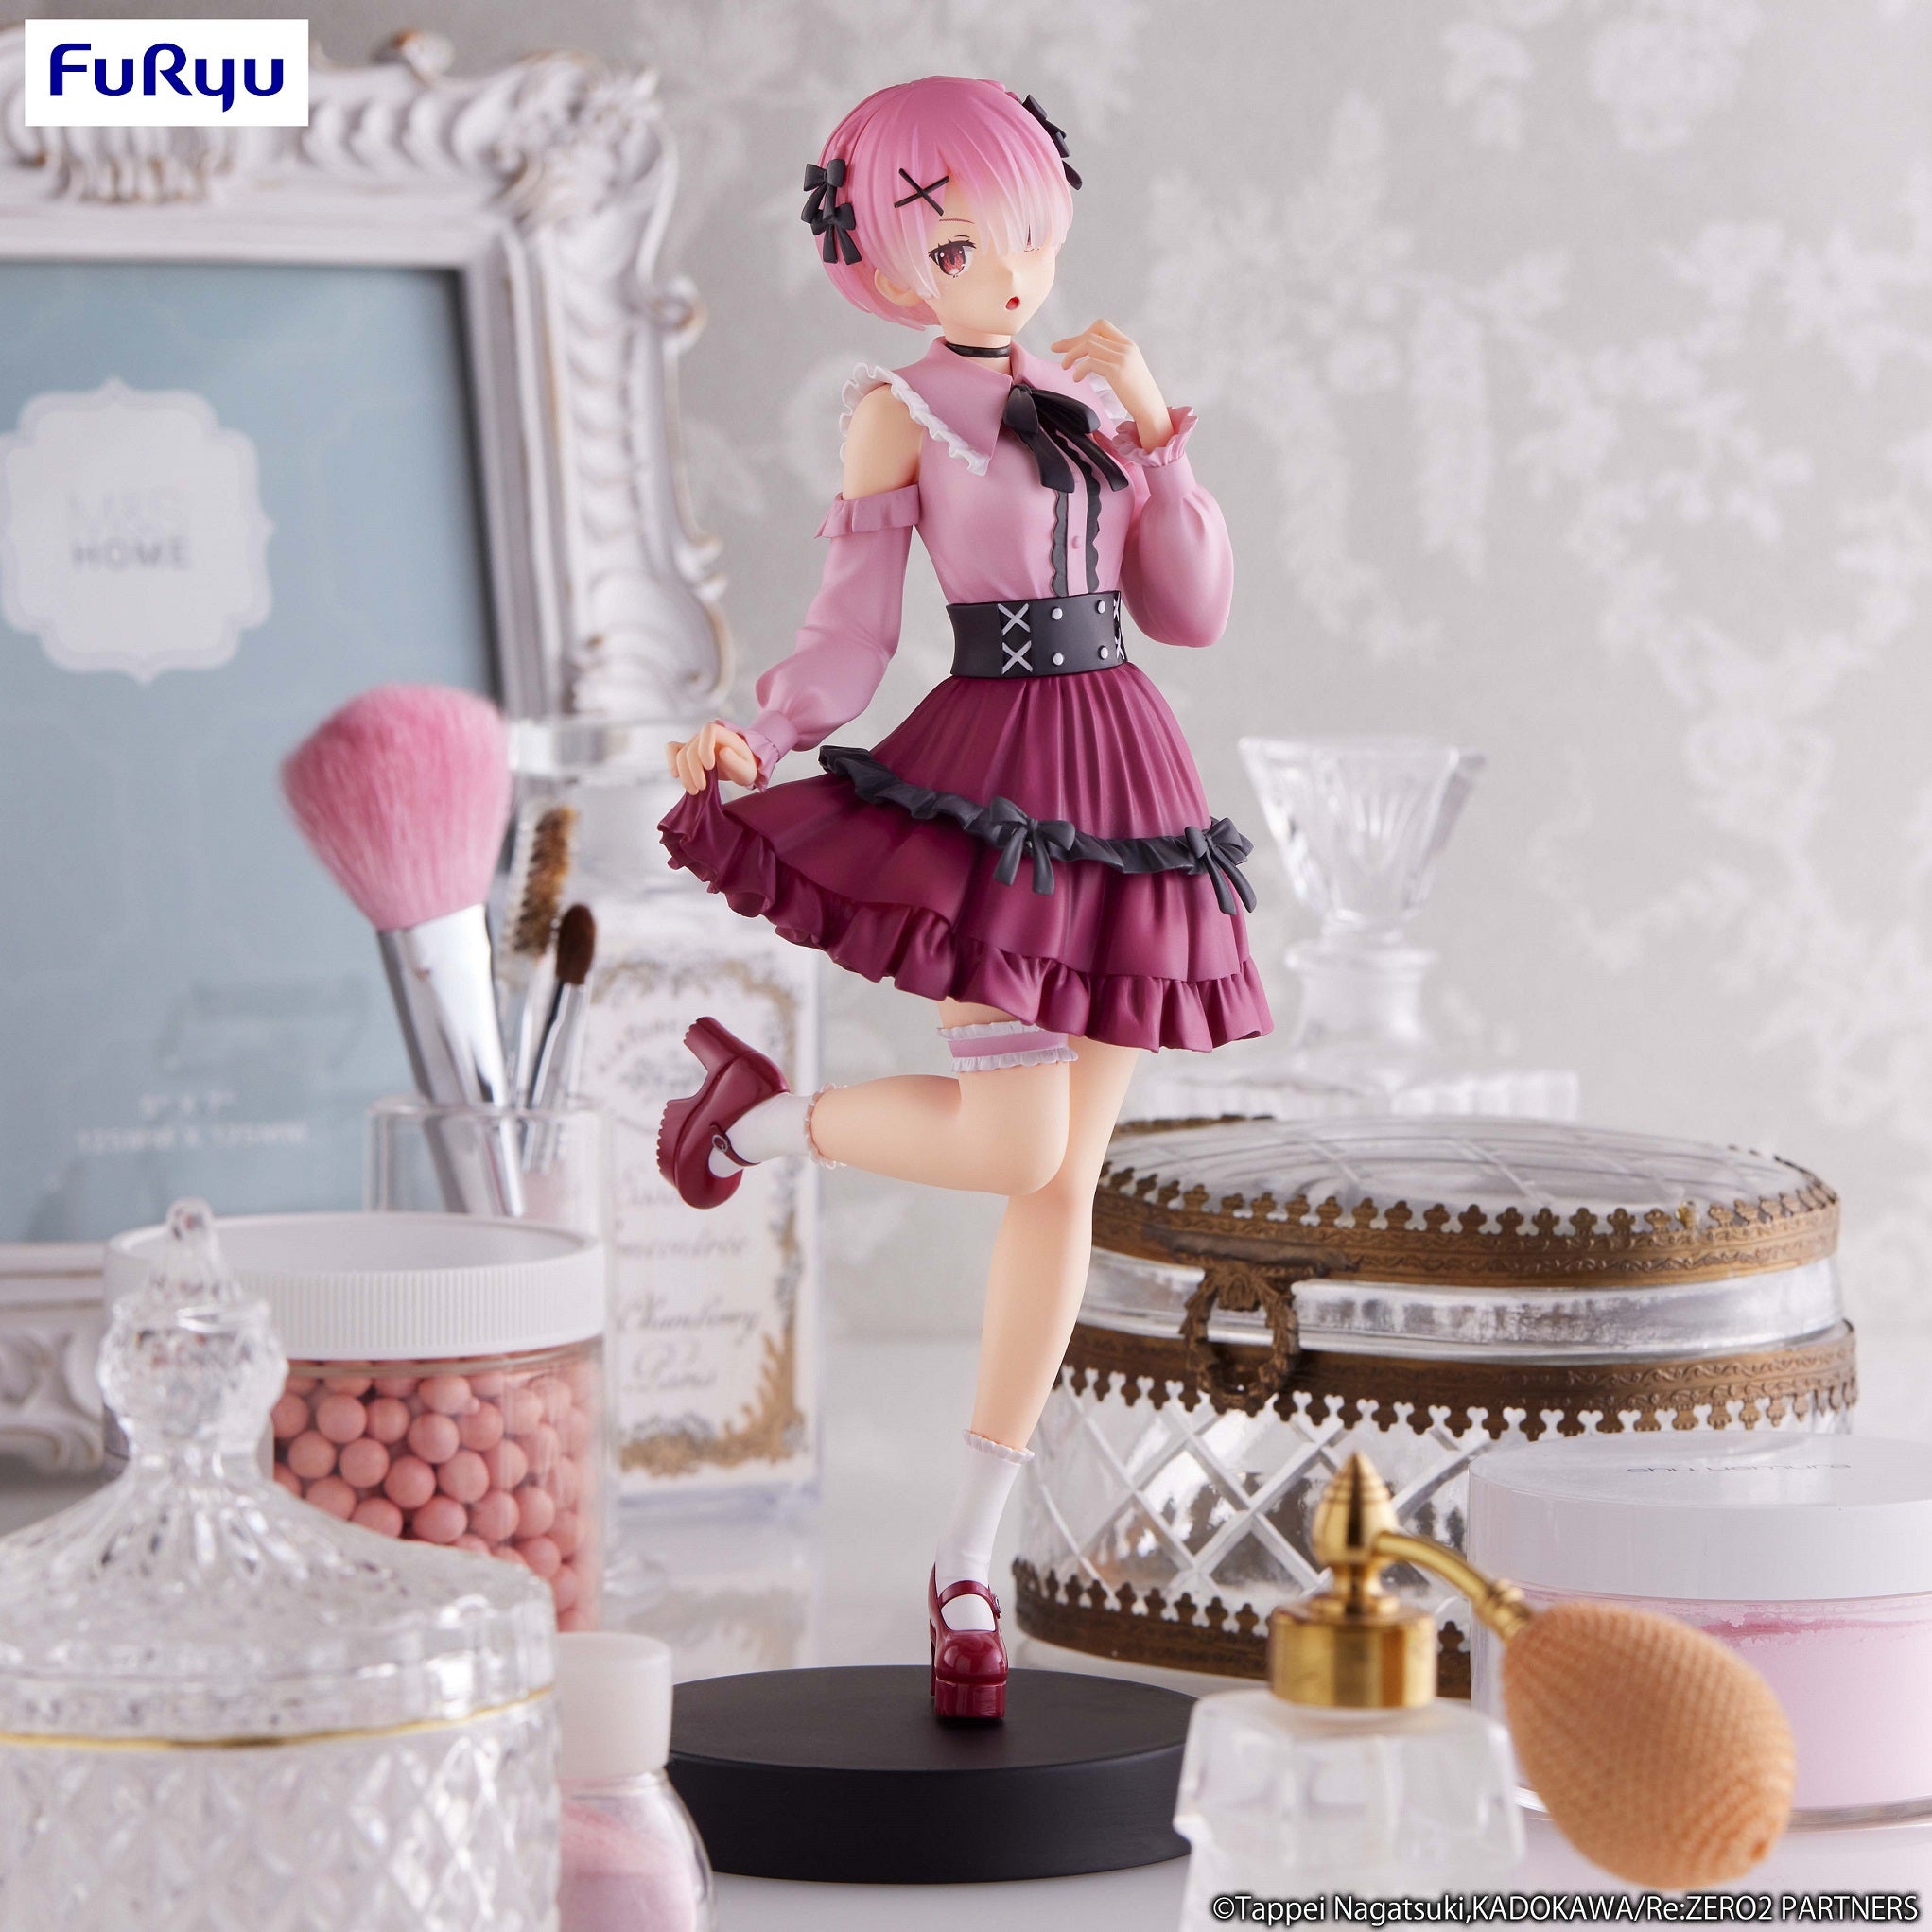 Furyu Figures Trio Try It: Re Zero Starting Life In Another World - Ram Girly Outfit